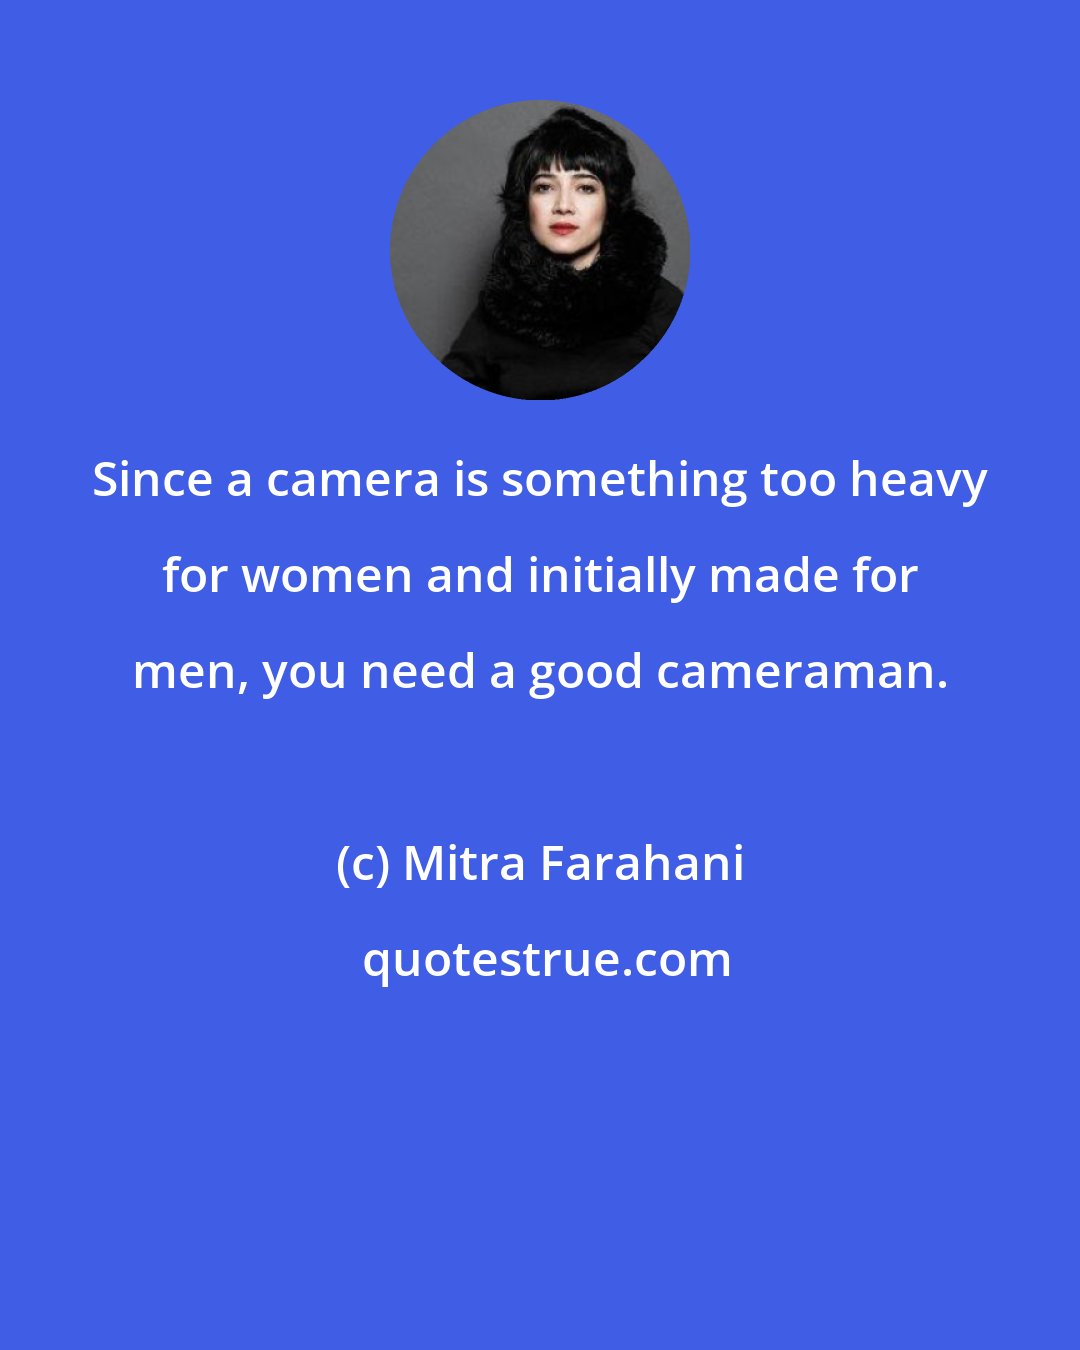 Mitra Farahani: Since a camera is something too heavy for women and initially made for men, you need a good cameraman.